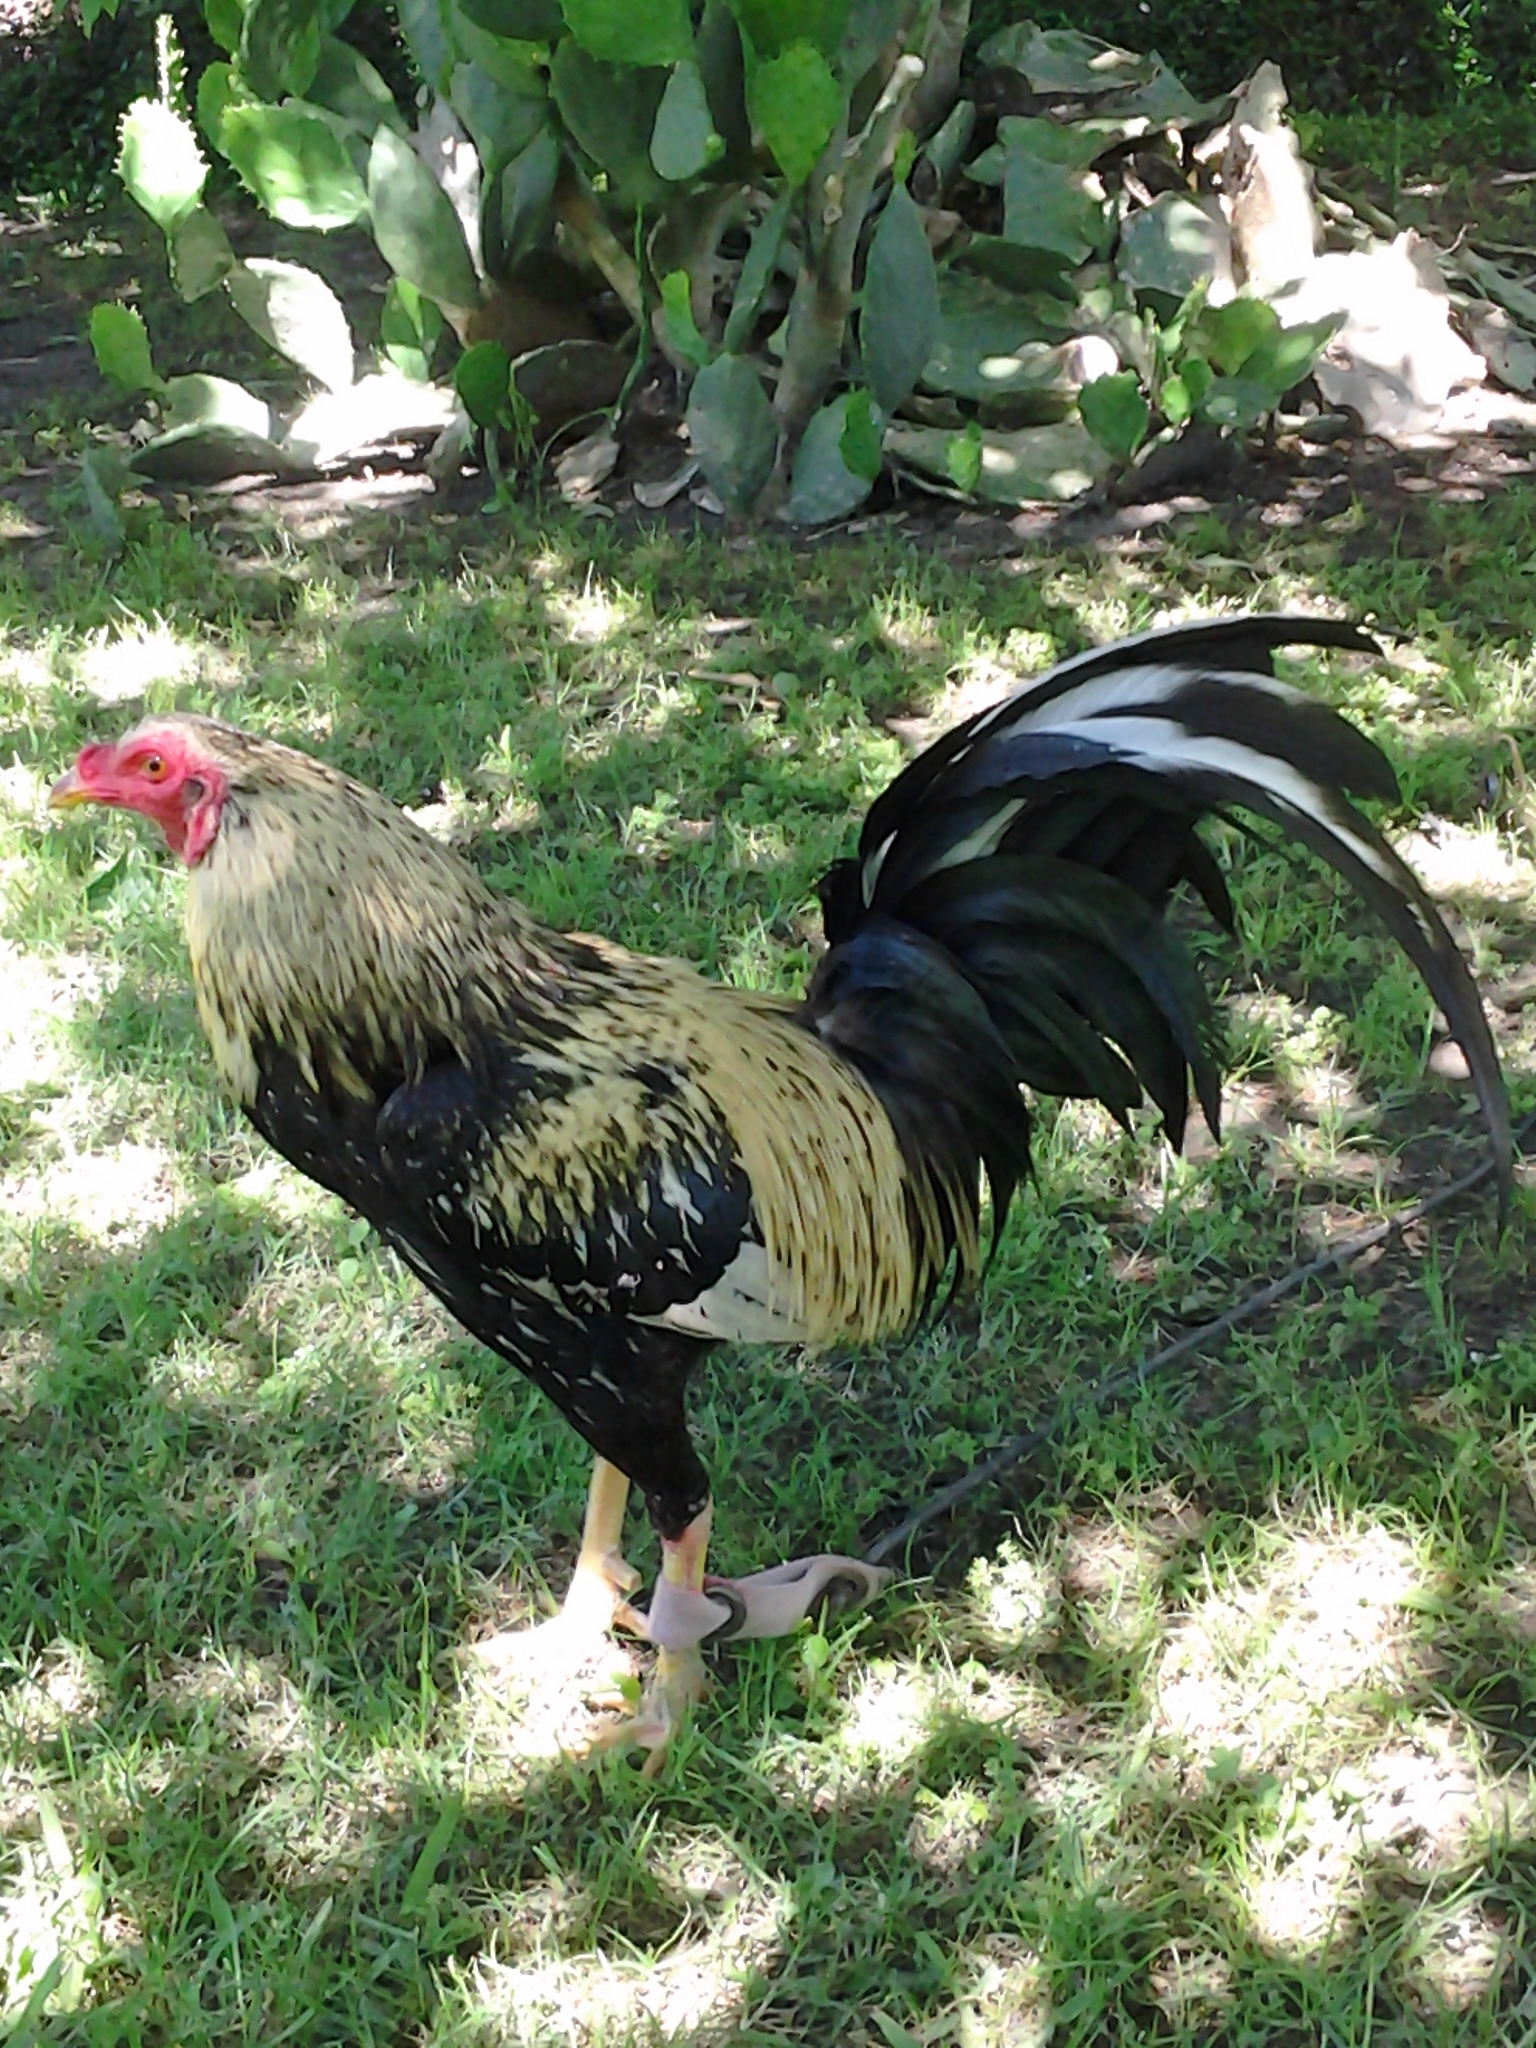 The grandfather of my flock.Got him for $25.00 U.S.D. from The Wabash feed store in Houston Texas